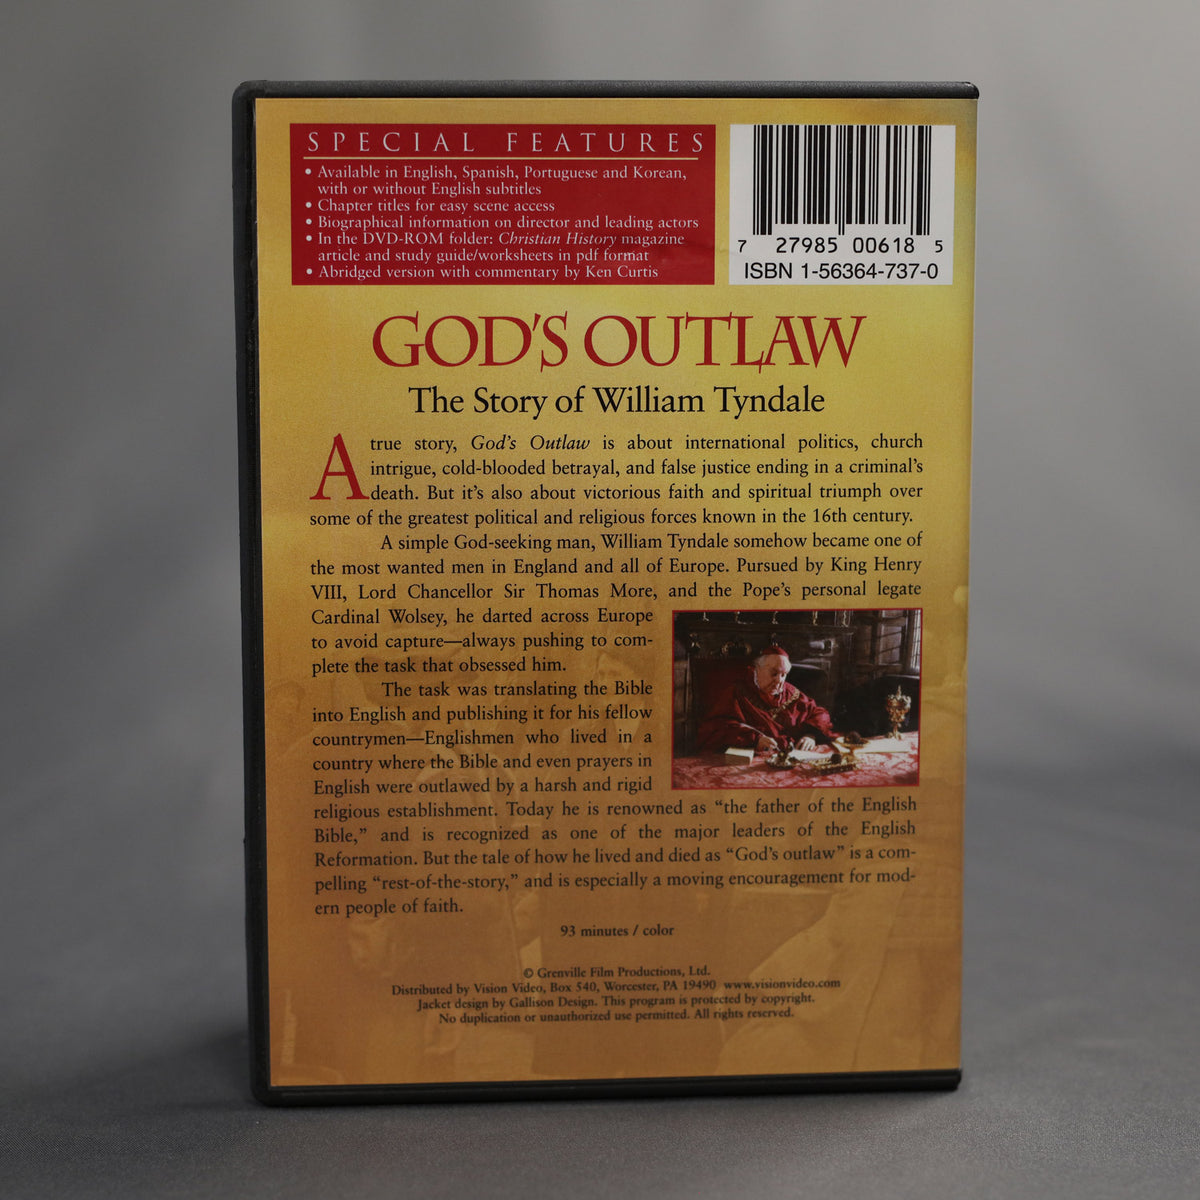 God&#39;s Outlaw - The Story of William Tyndale (DVD)